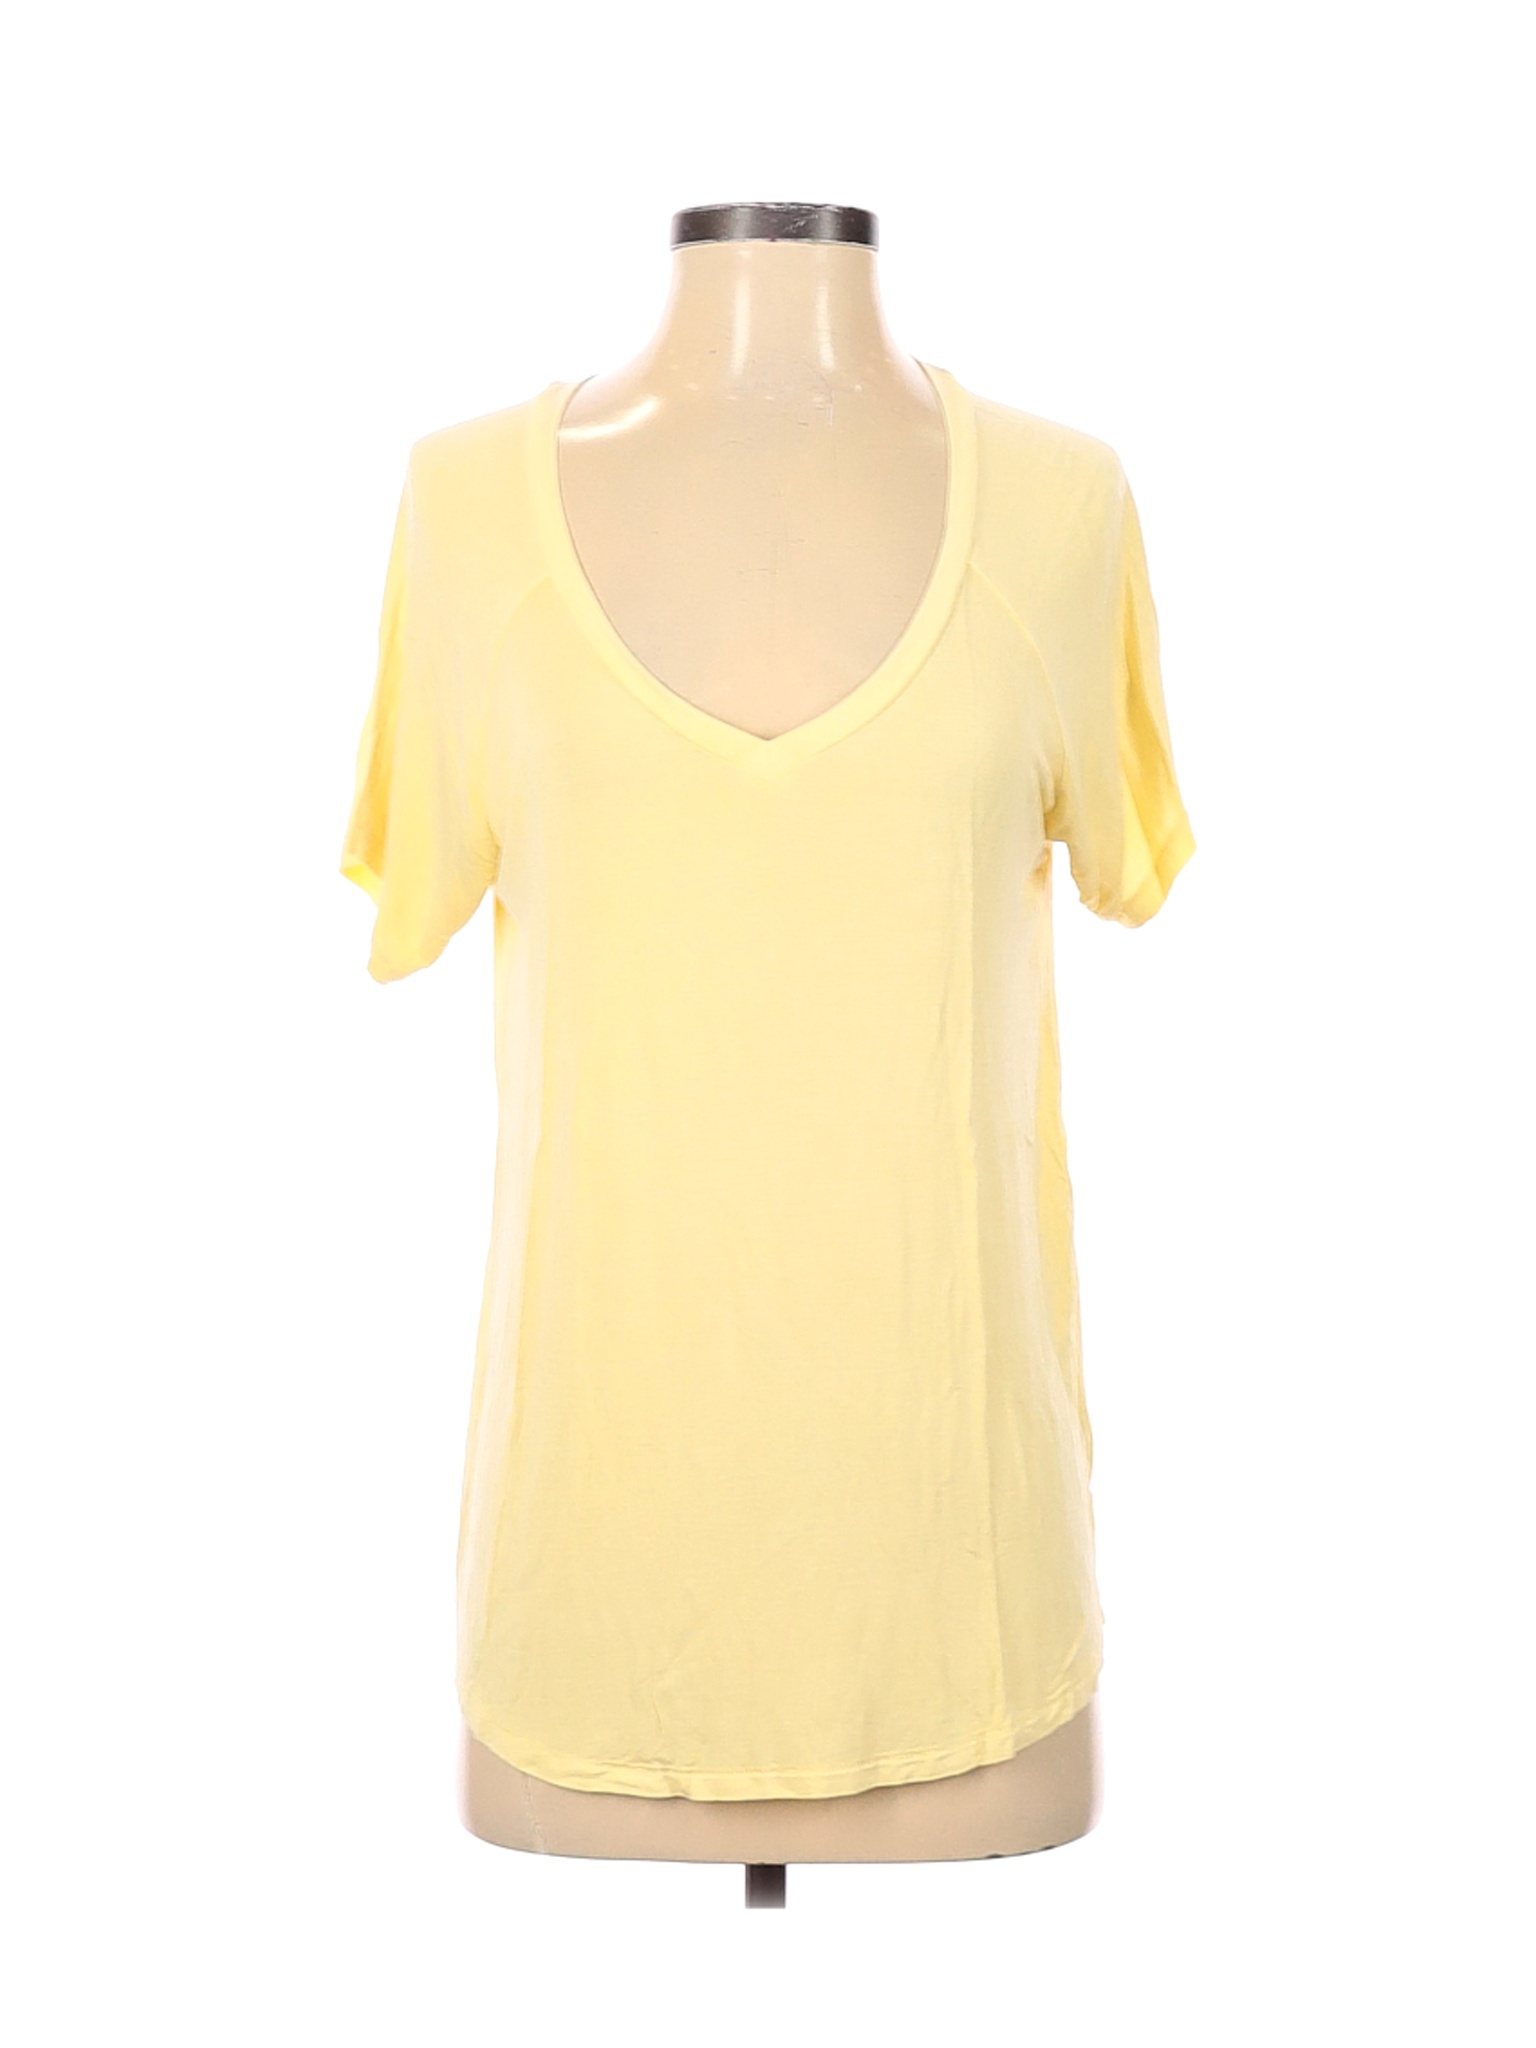 American Eagle Outfitters Women Yellow Short Sleeve T-Shirt XS | eBay